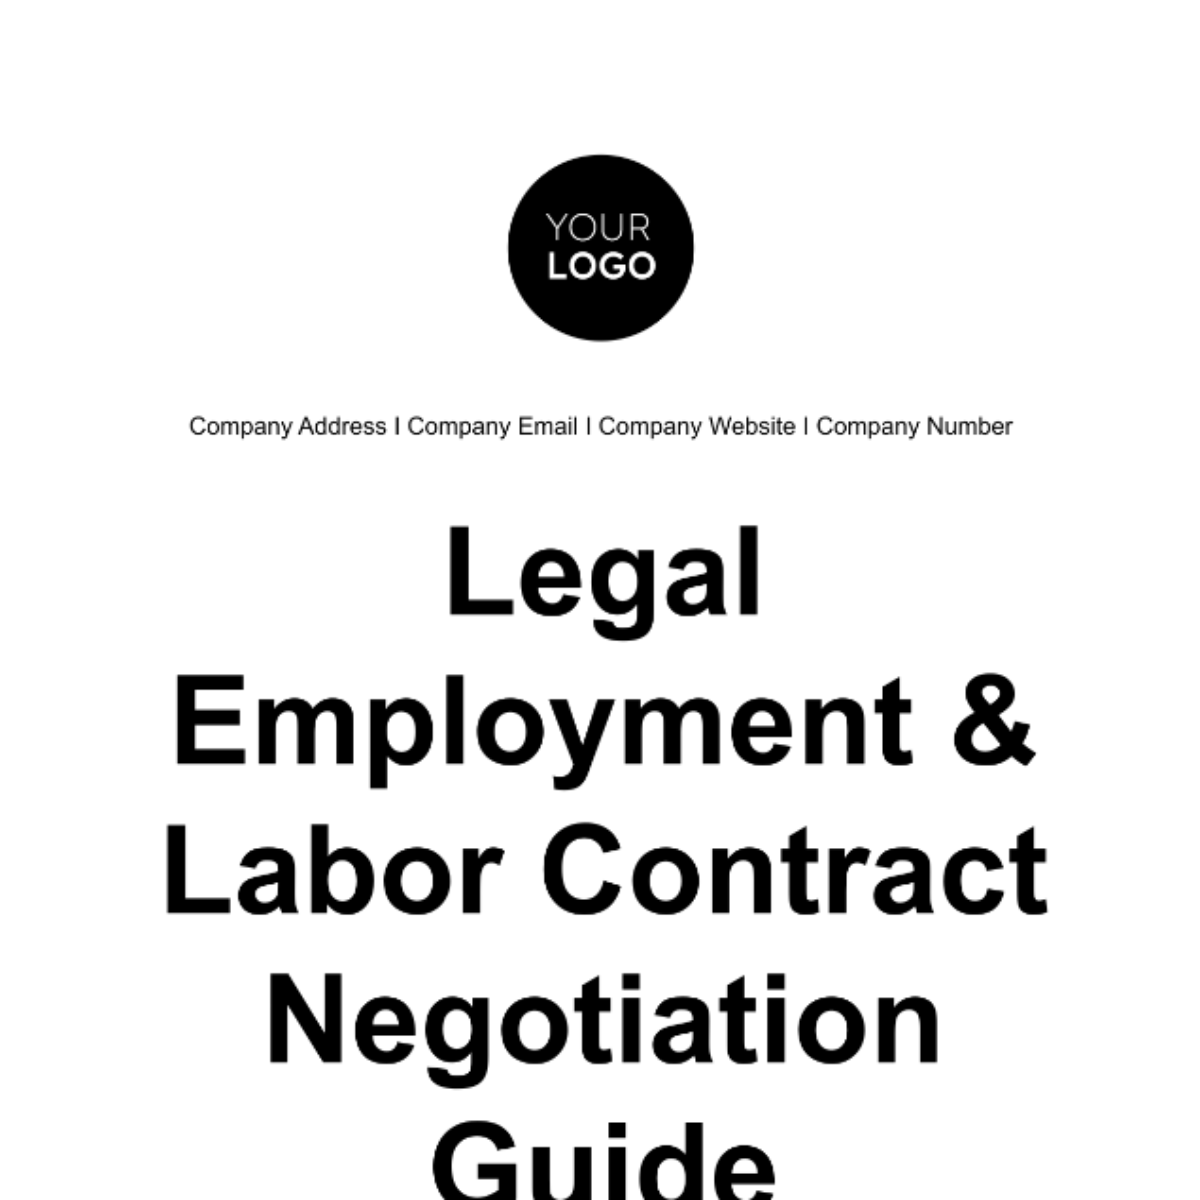 Free Legal Employment & Labor Contract Negotiation Guide Template